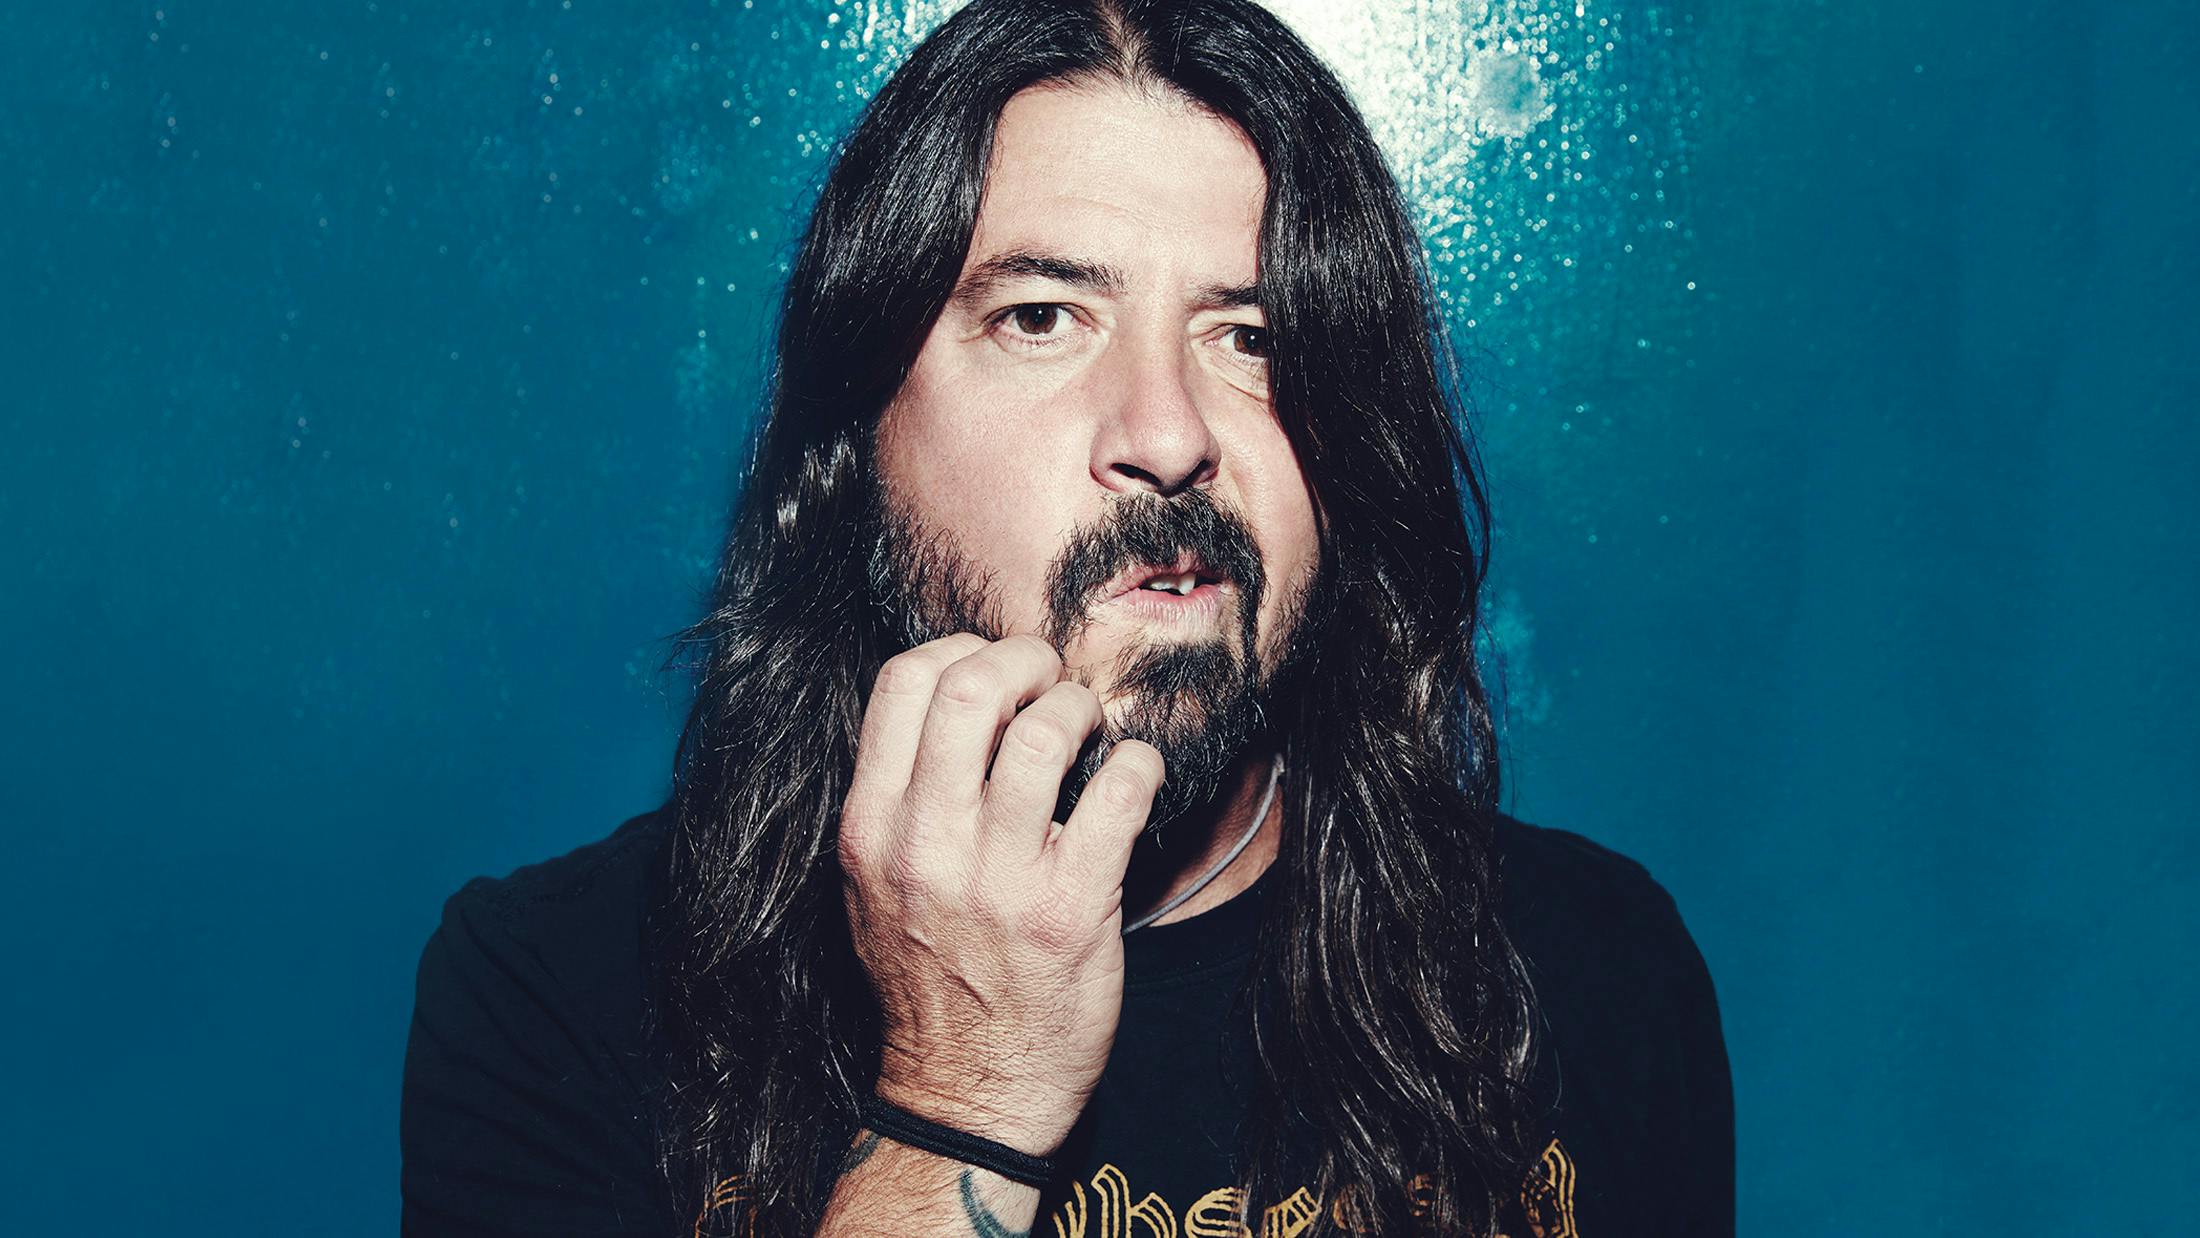 Foo Fighters’ Dave Grohl: The live shows that made me